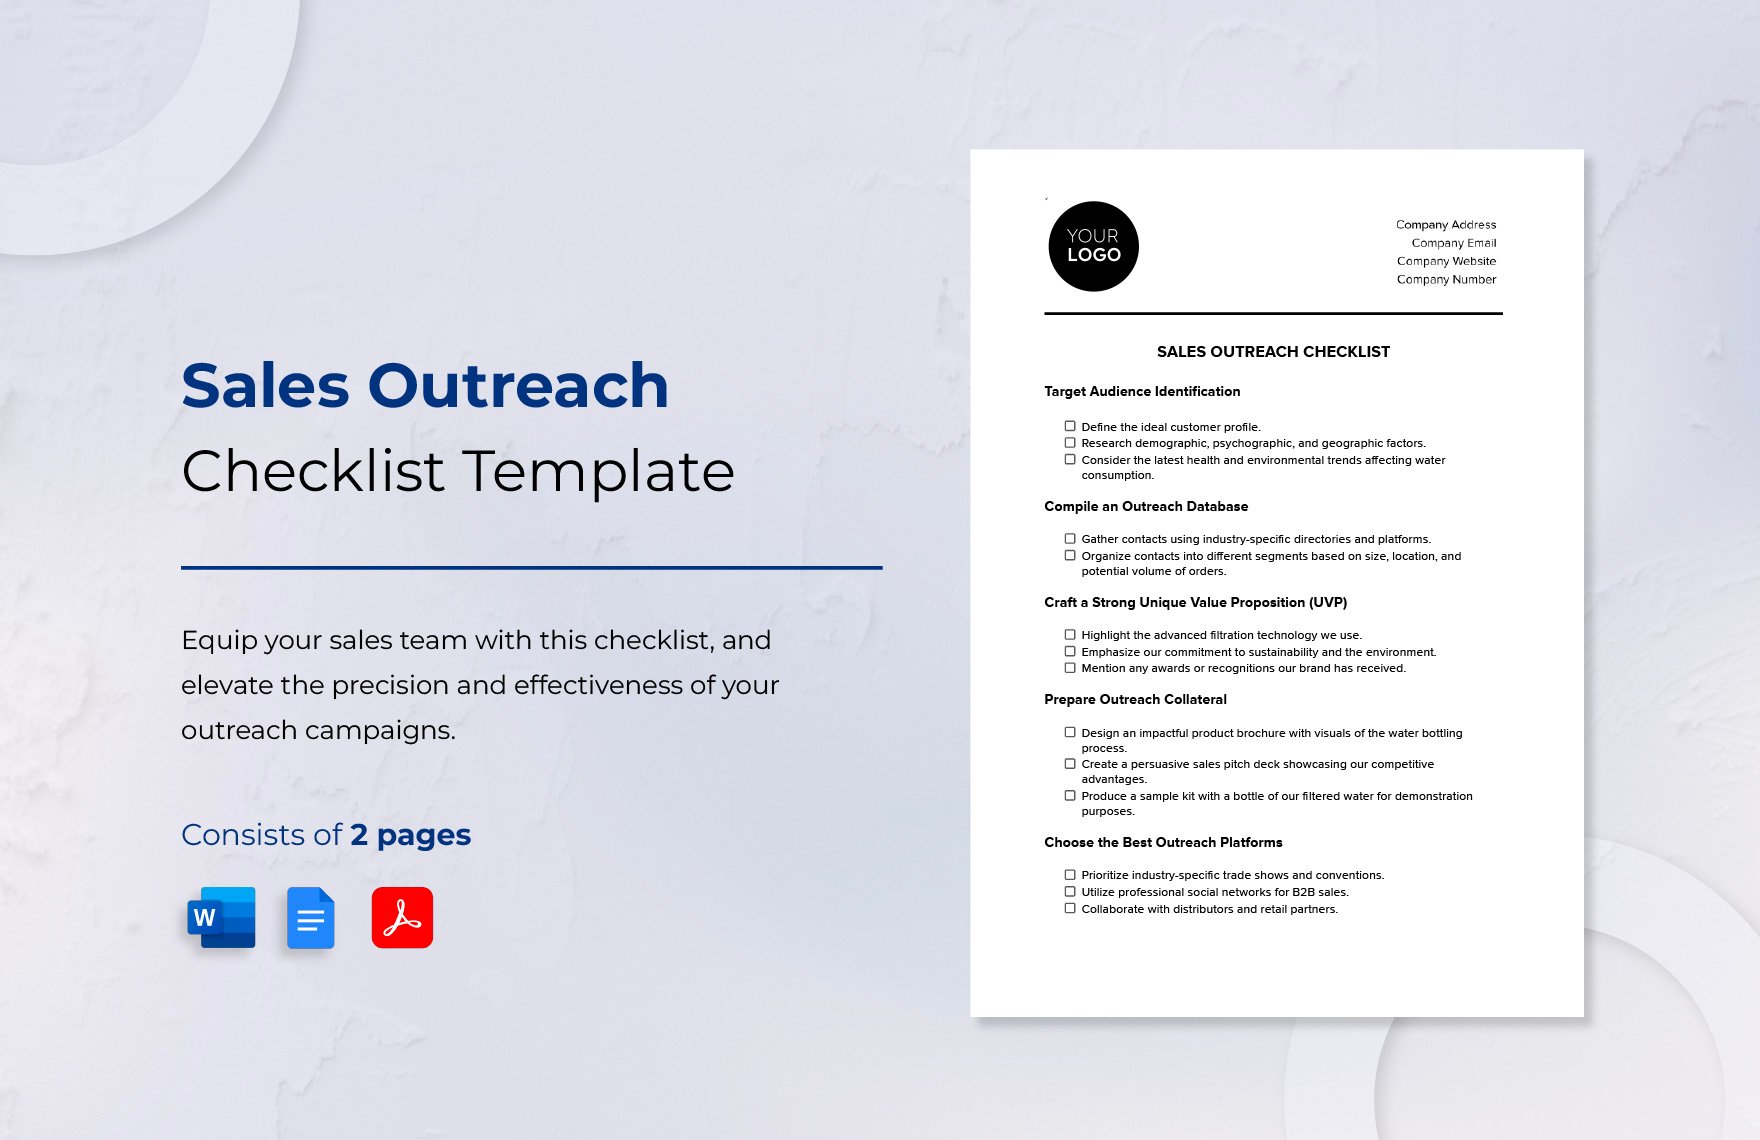 Sales Outreach Checklist Template in Word, Google Docs, PDF